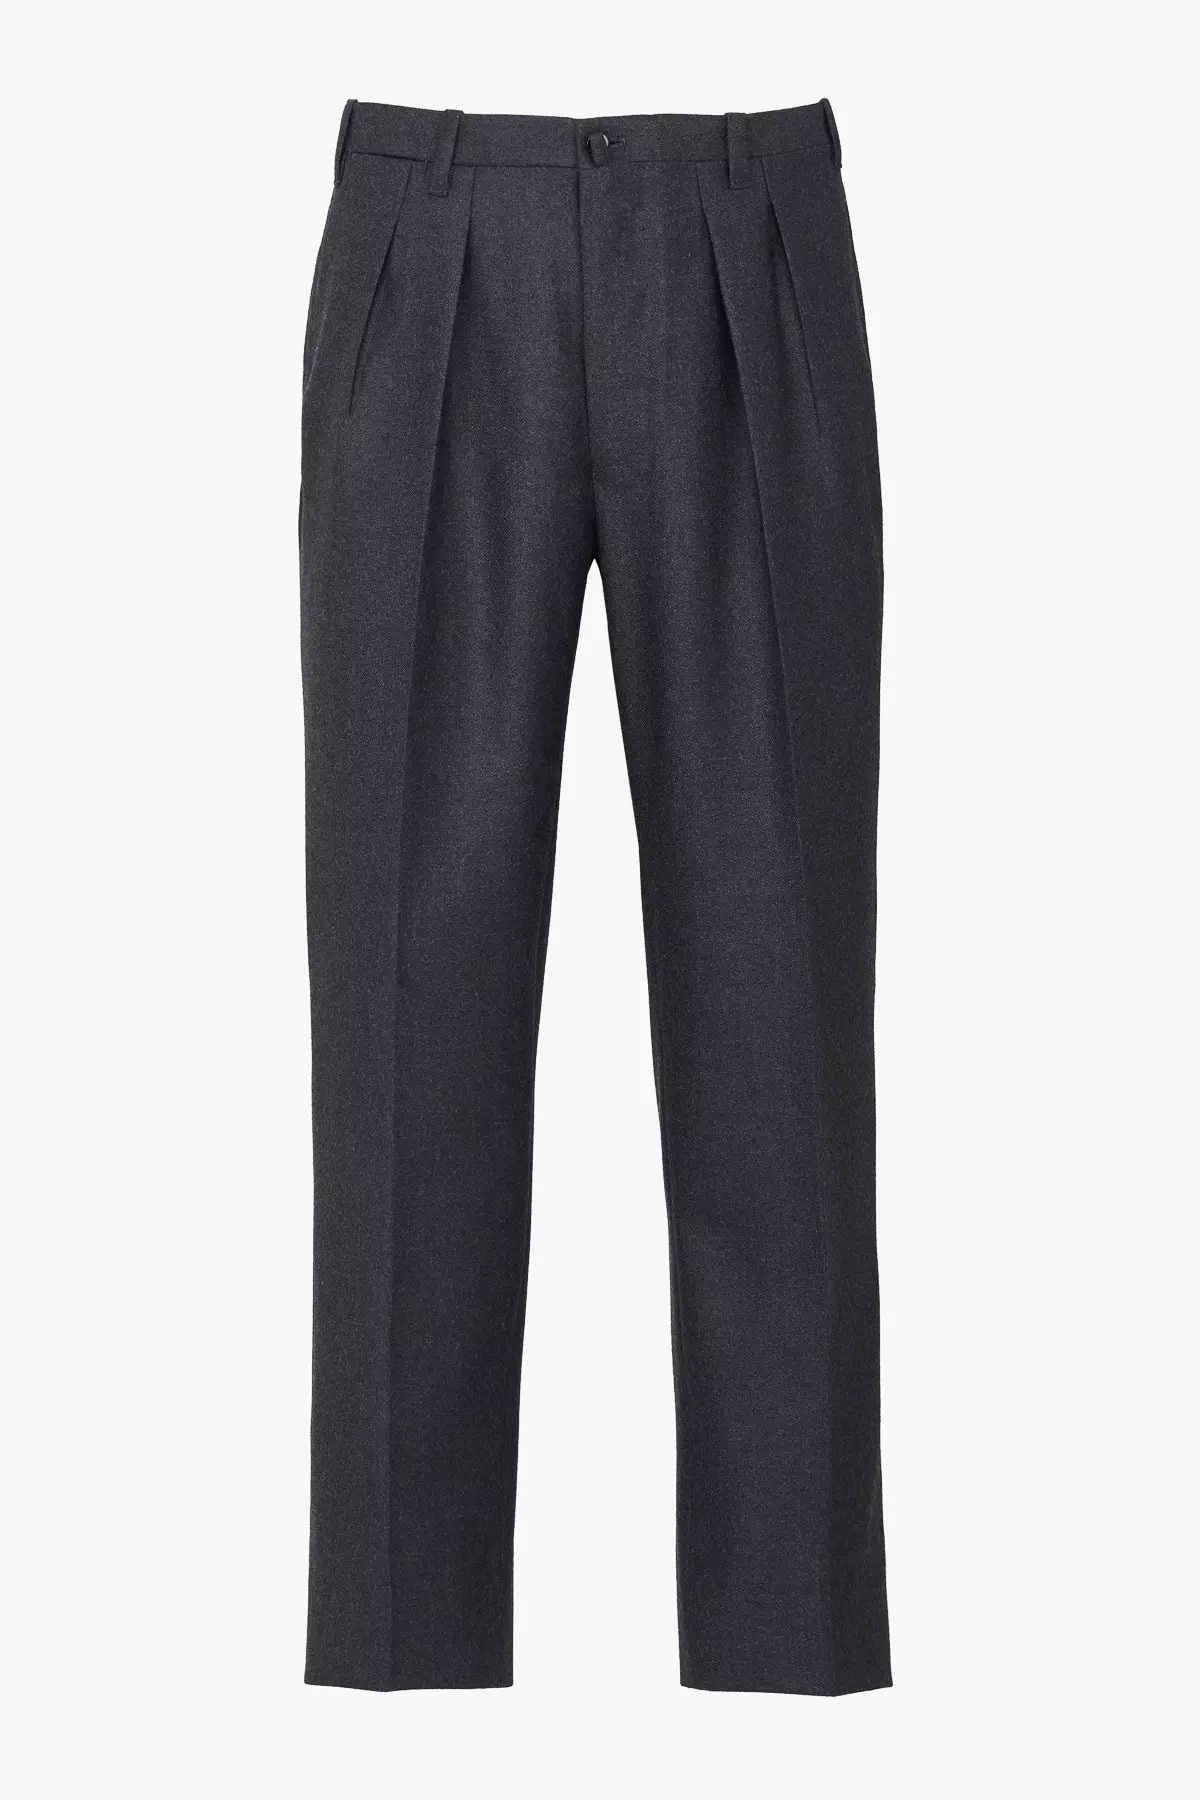 I've been on the look out for mid-grey flannel pants – Put This On